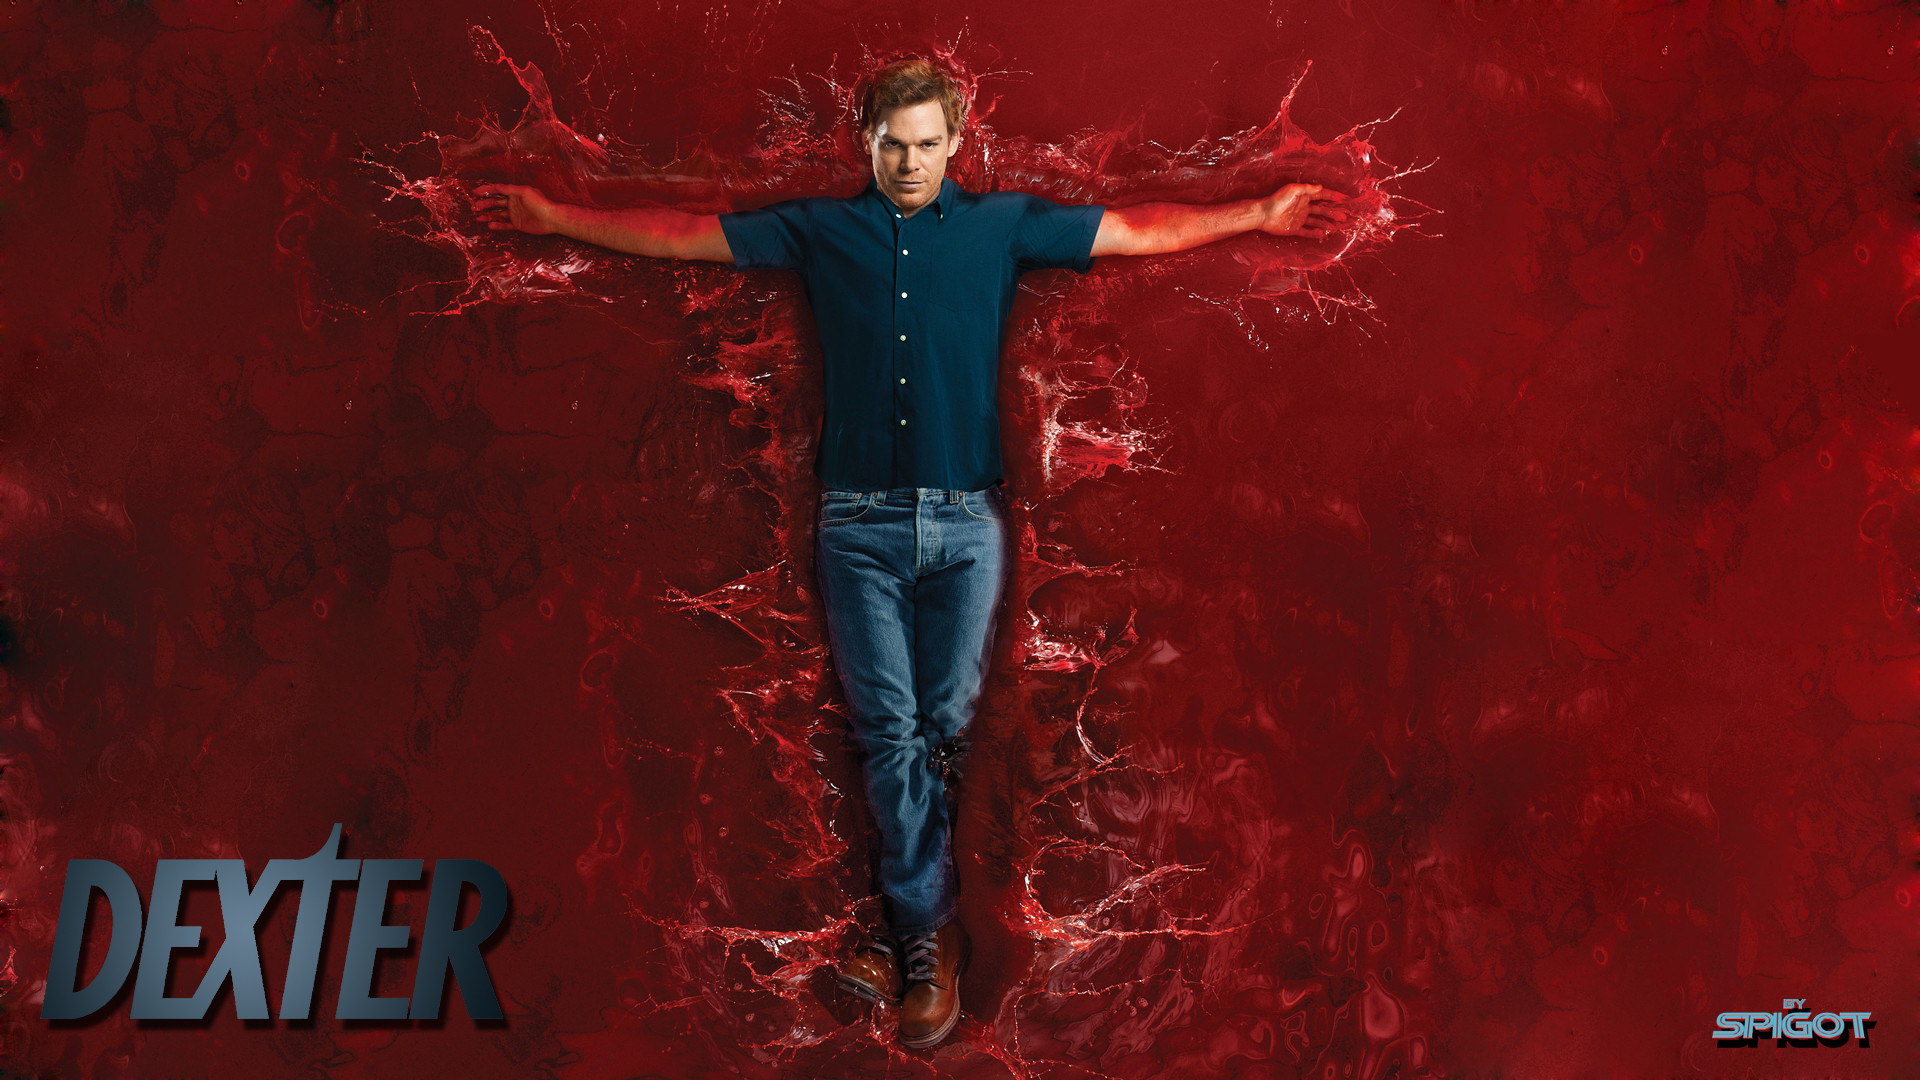 1920x1080 The series centers on Dexter Morgan (Michael C. Hall), a bloodstain pattern  analyst for the Miami Metro Police Department who moonlights as a serial  killer ...